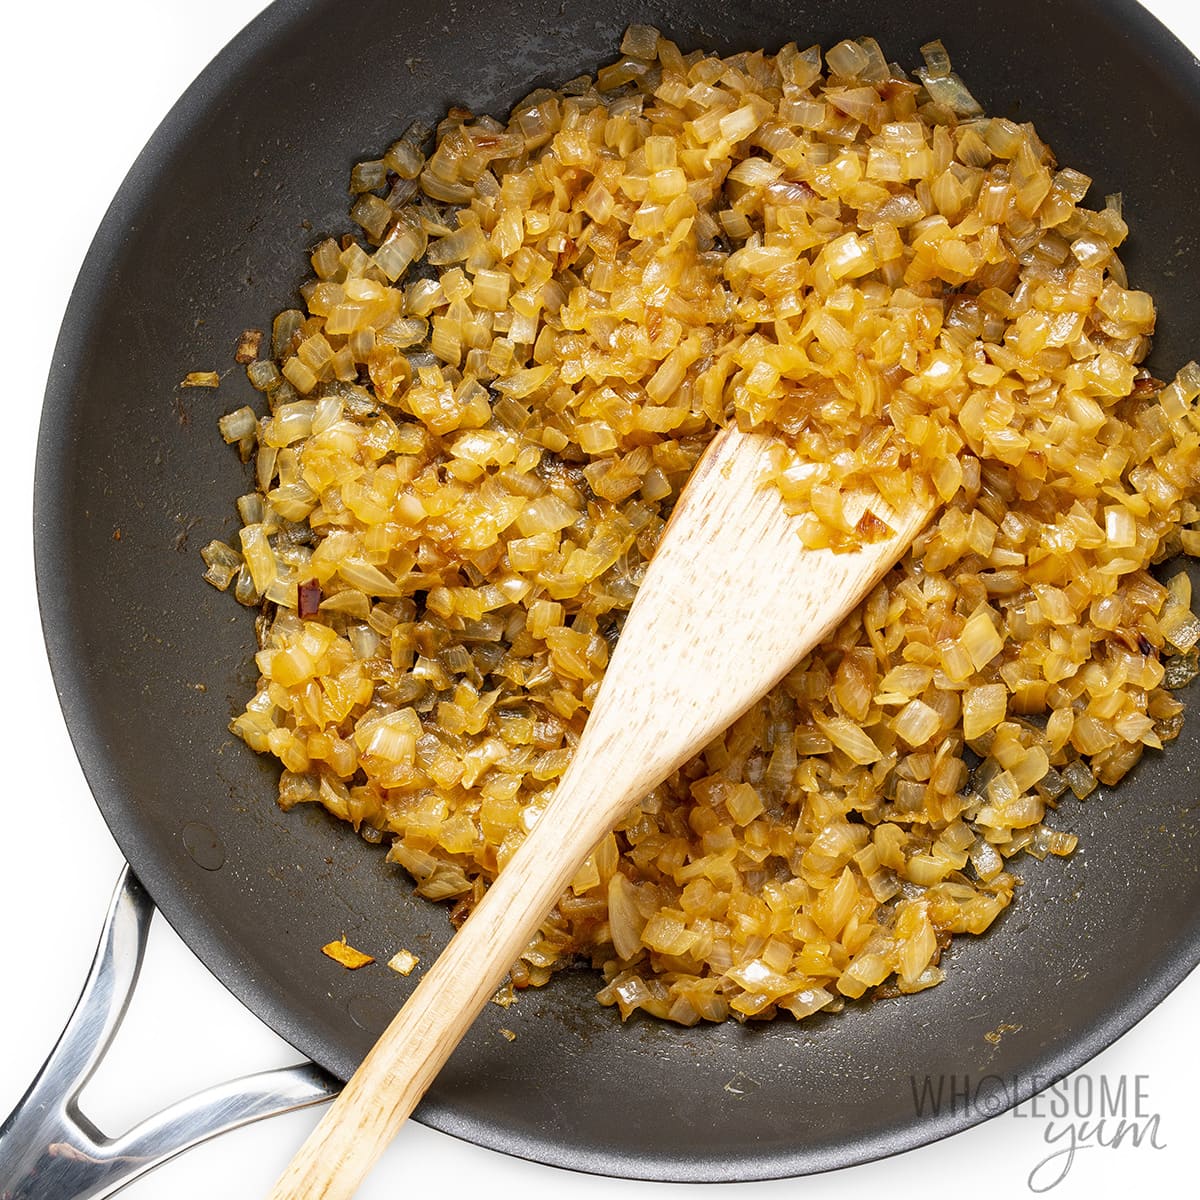 Caramelized onions in a large pan.